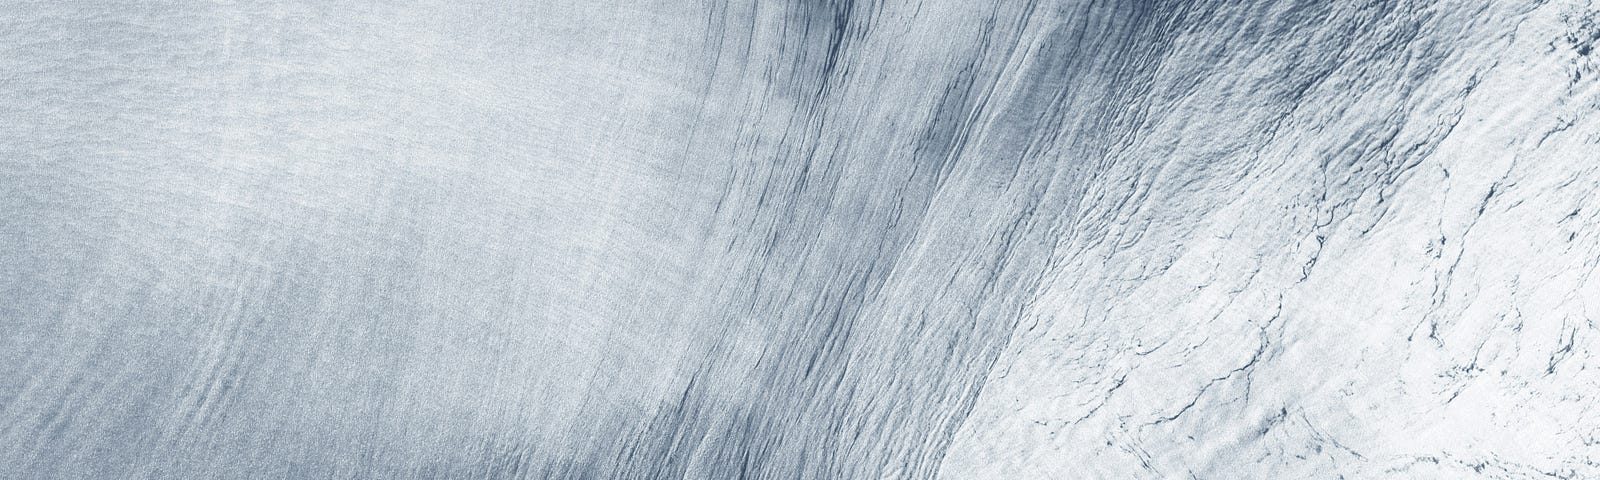 A swirl of blue and white